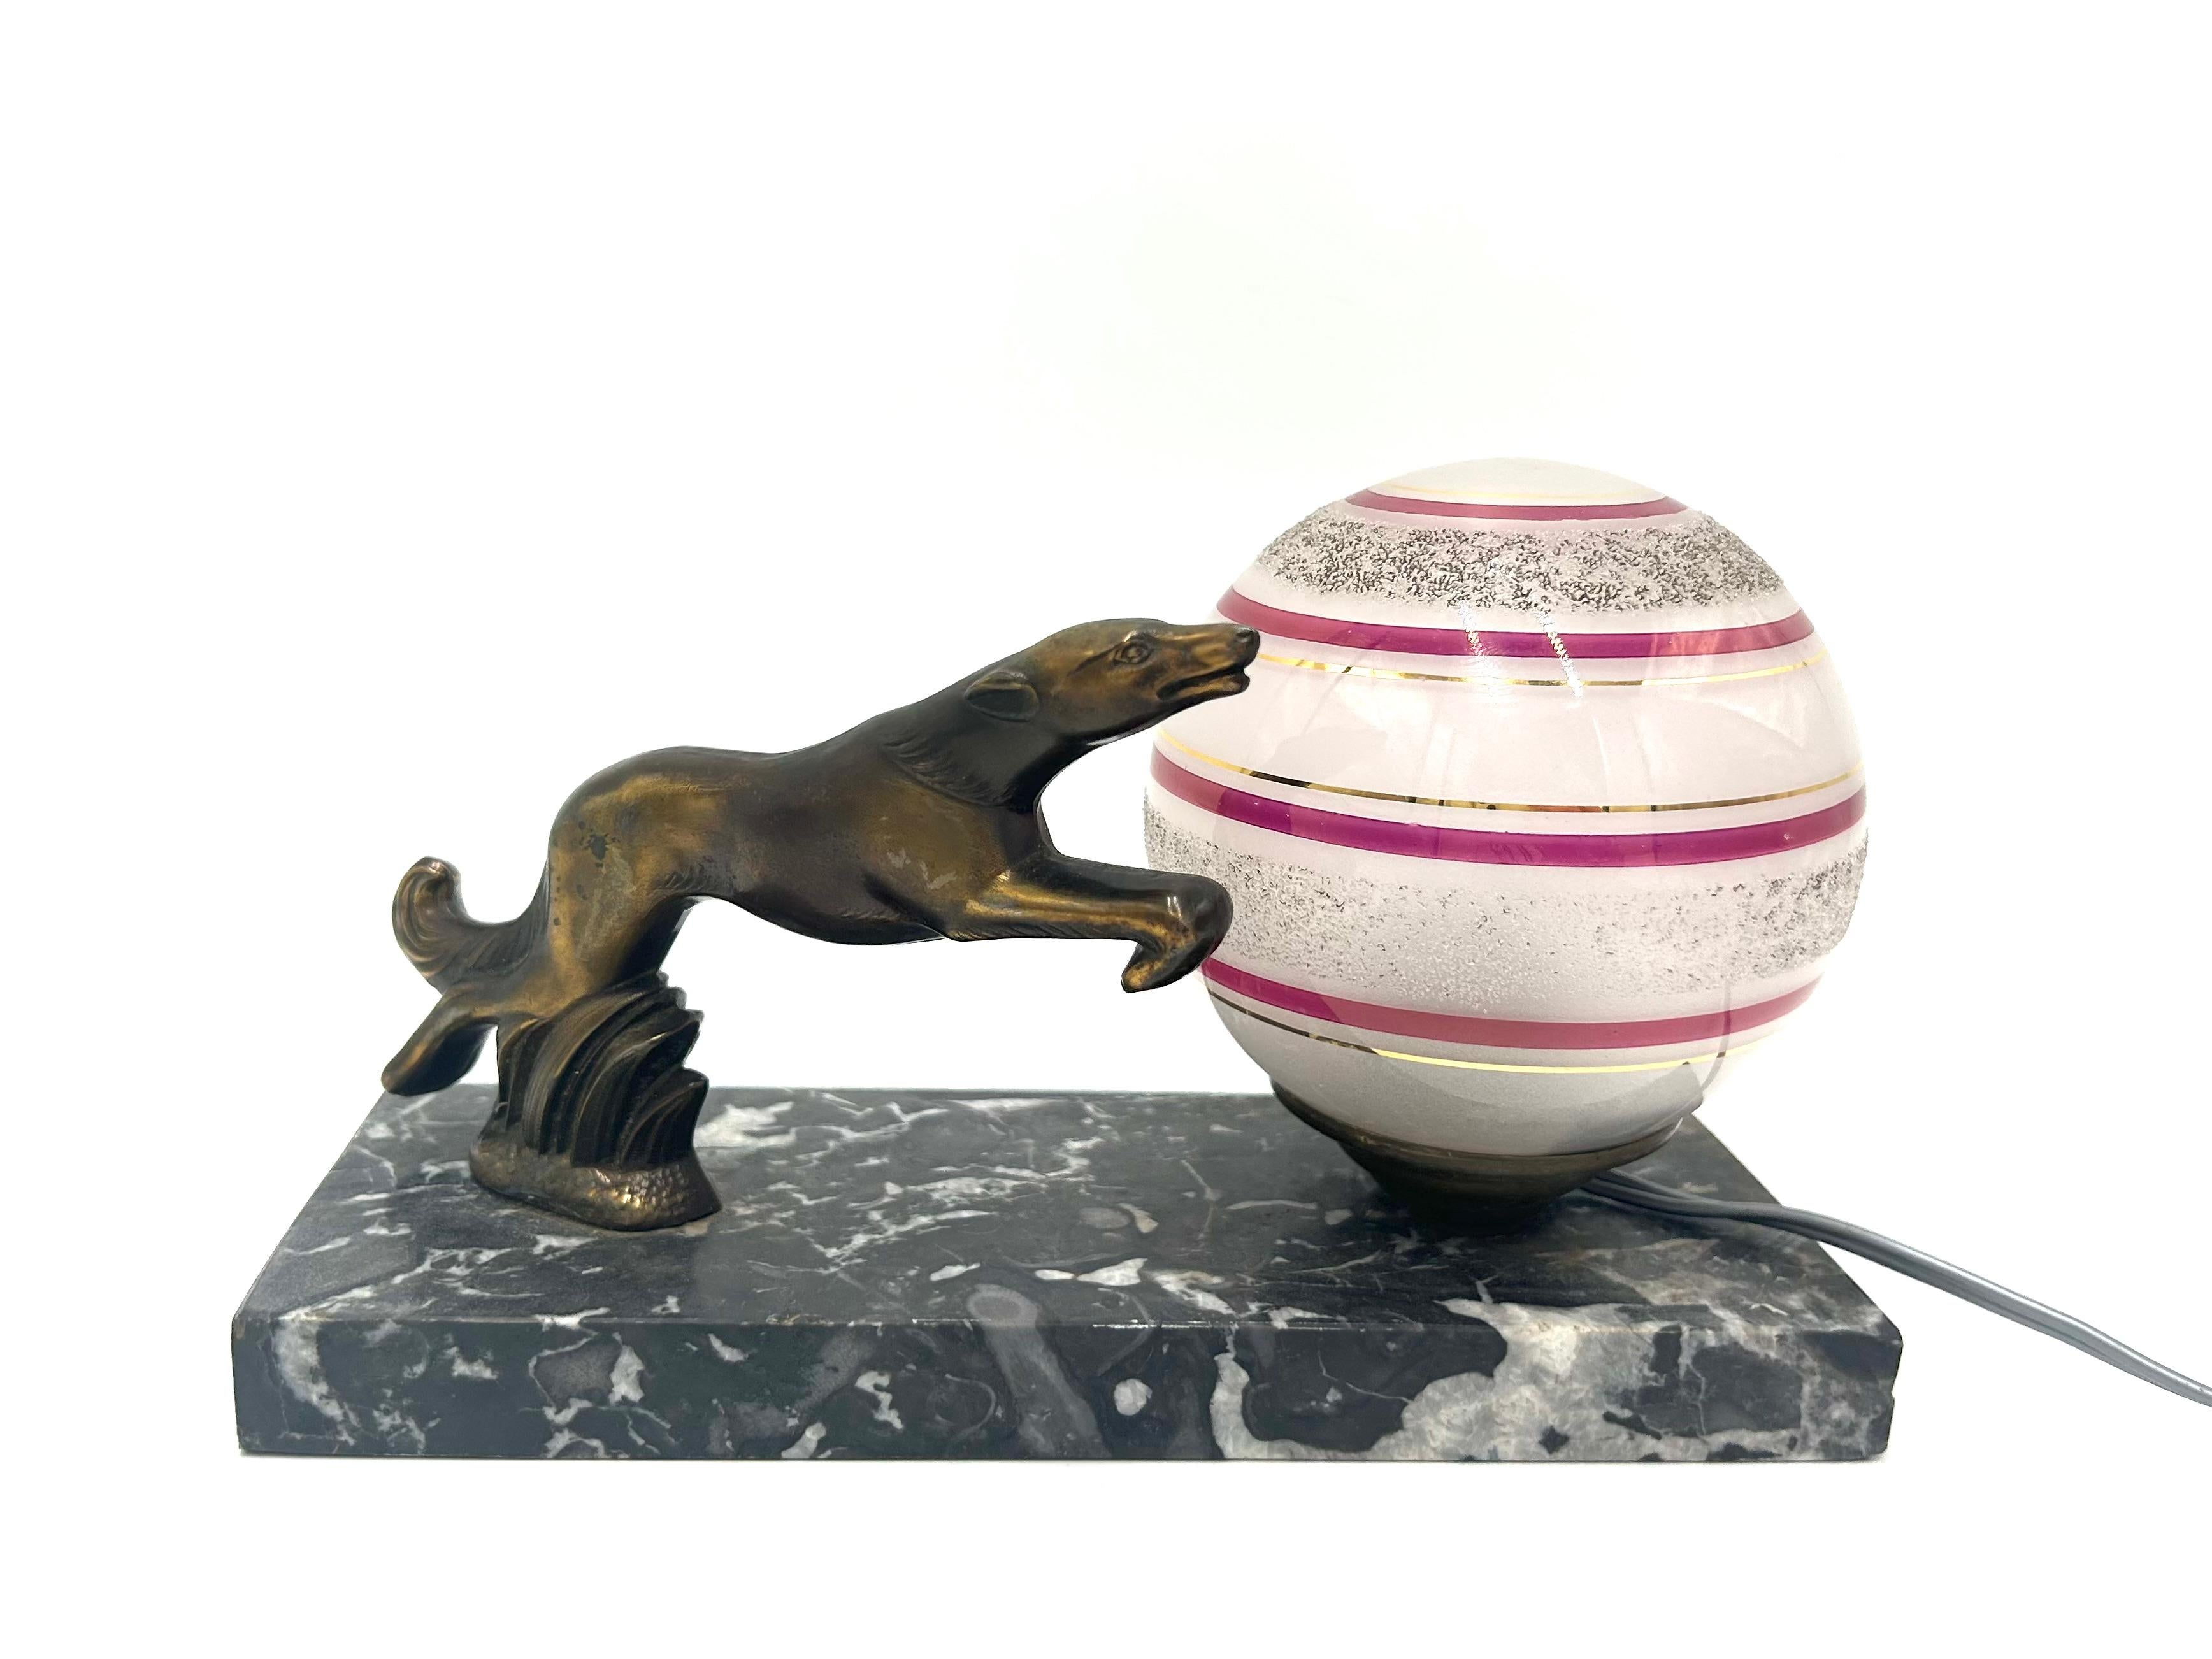 Art Deco table lamp. It consists of a marble base, a glass lampshade in the shape of a ball and a figure of a running dog (greyhound). Bulb type B22 - smaller size. One piece included in the set. The lamp was made in England around 1940. Very good